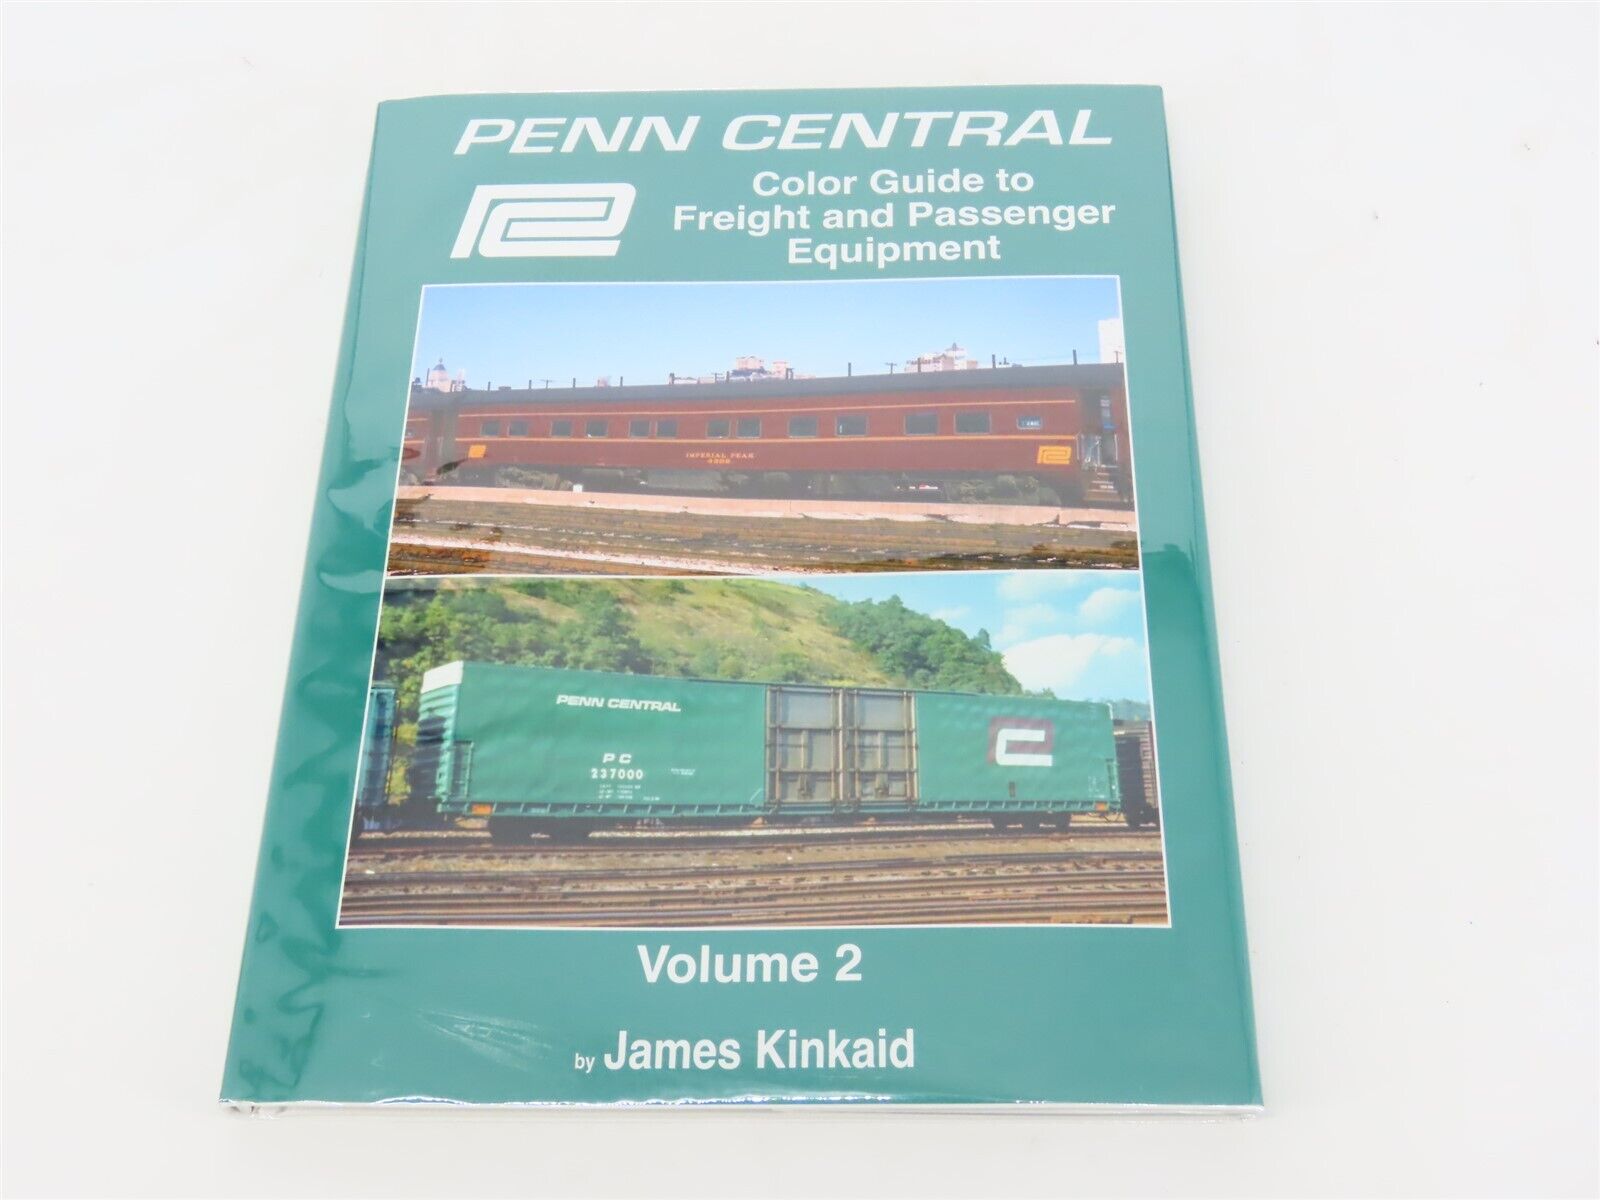 Morning Sun: PC Color Guide To Freight & Passenger Equipment V. 2 by J. Kinkaid 